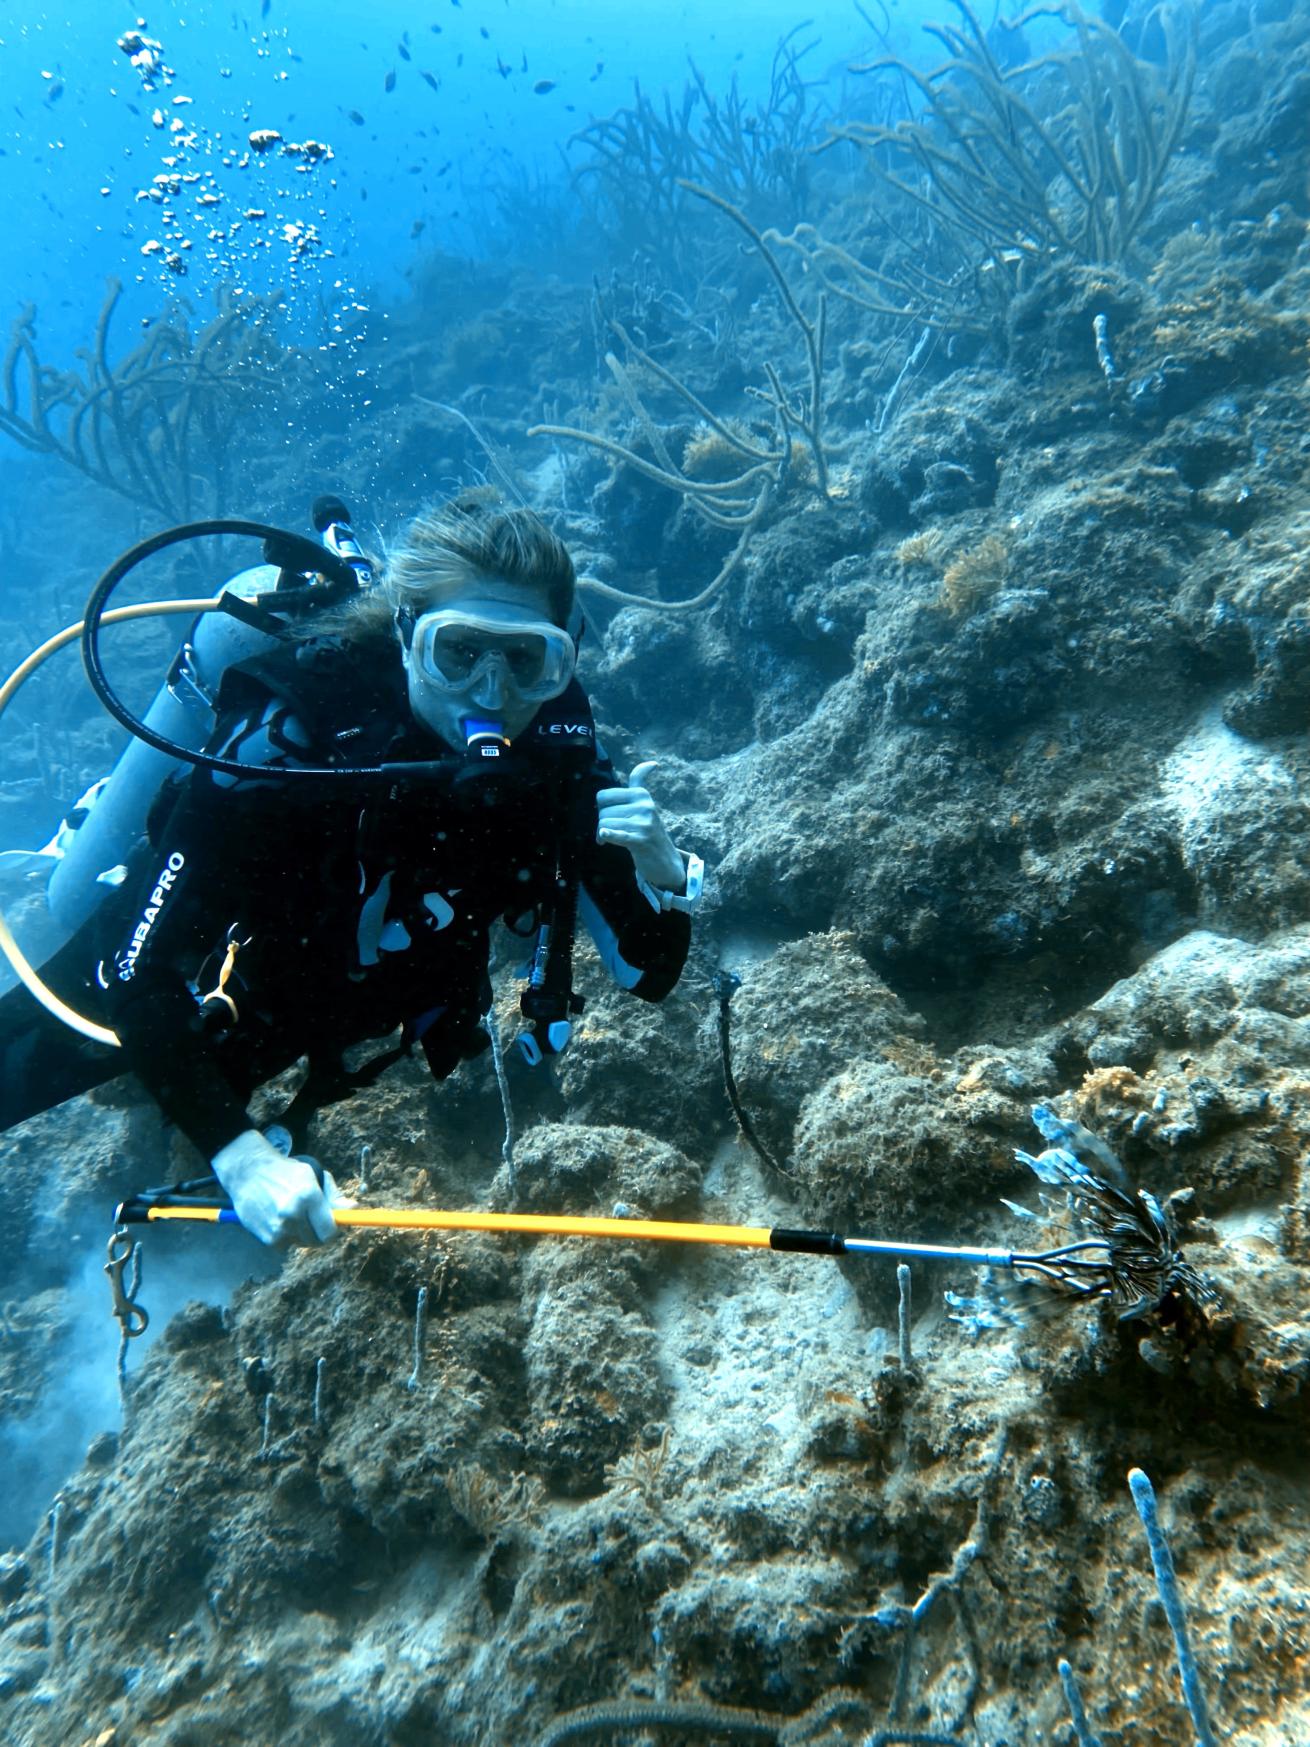 A volunteer diving spearing an invasive lion fish